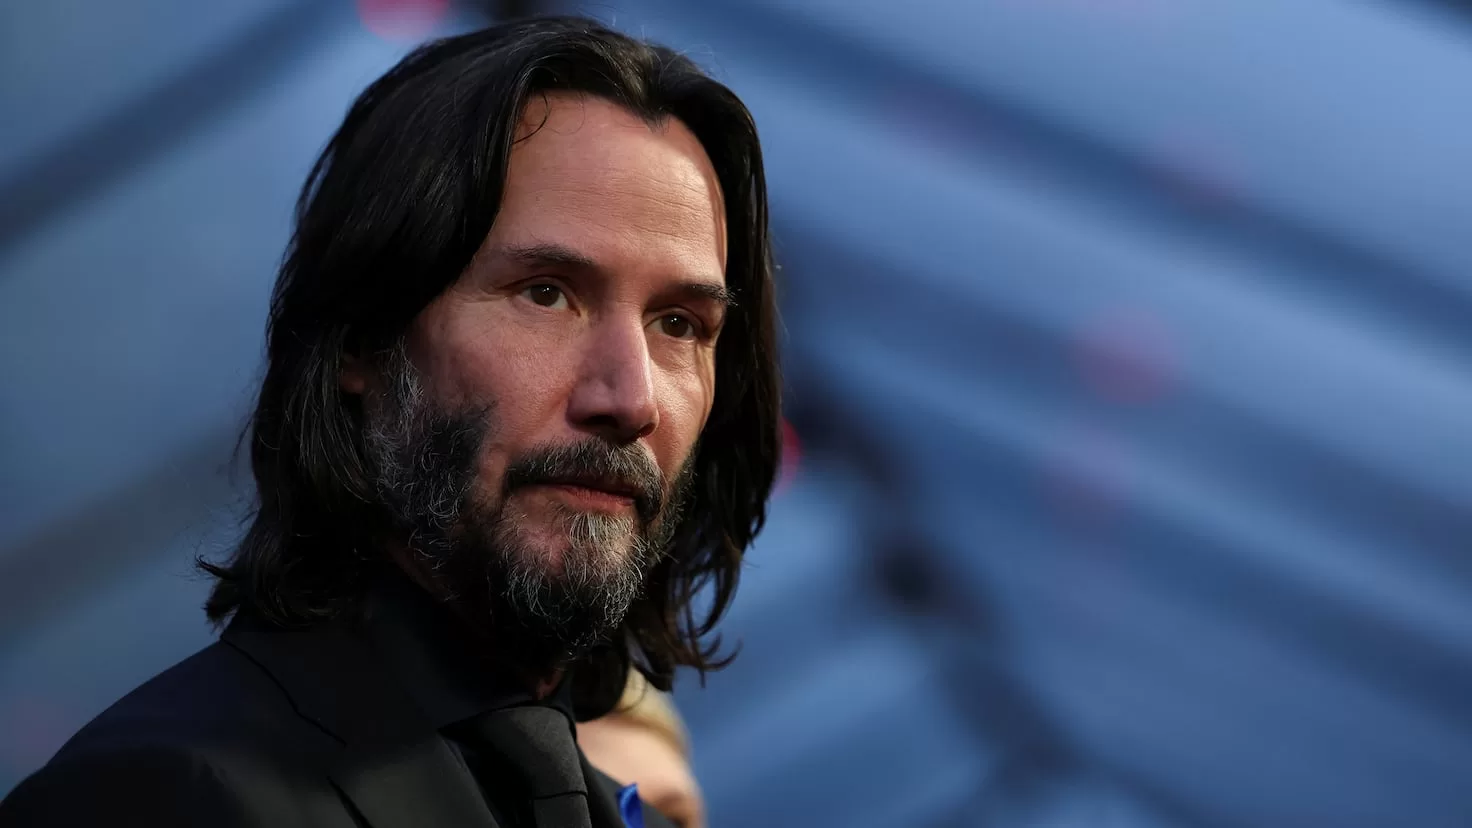 Keanu Reeves' makeover in his new movie: It's something different
